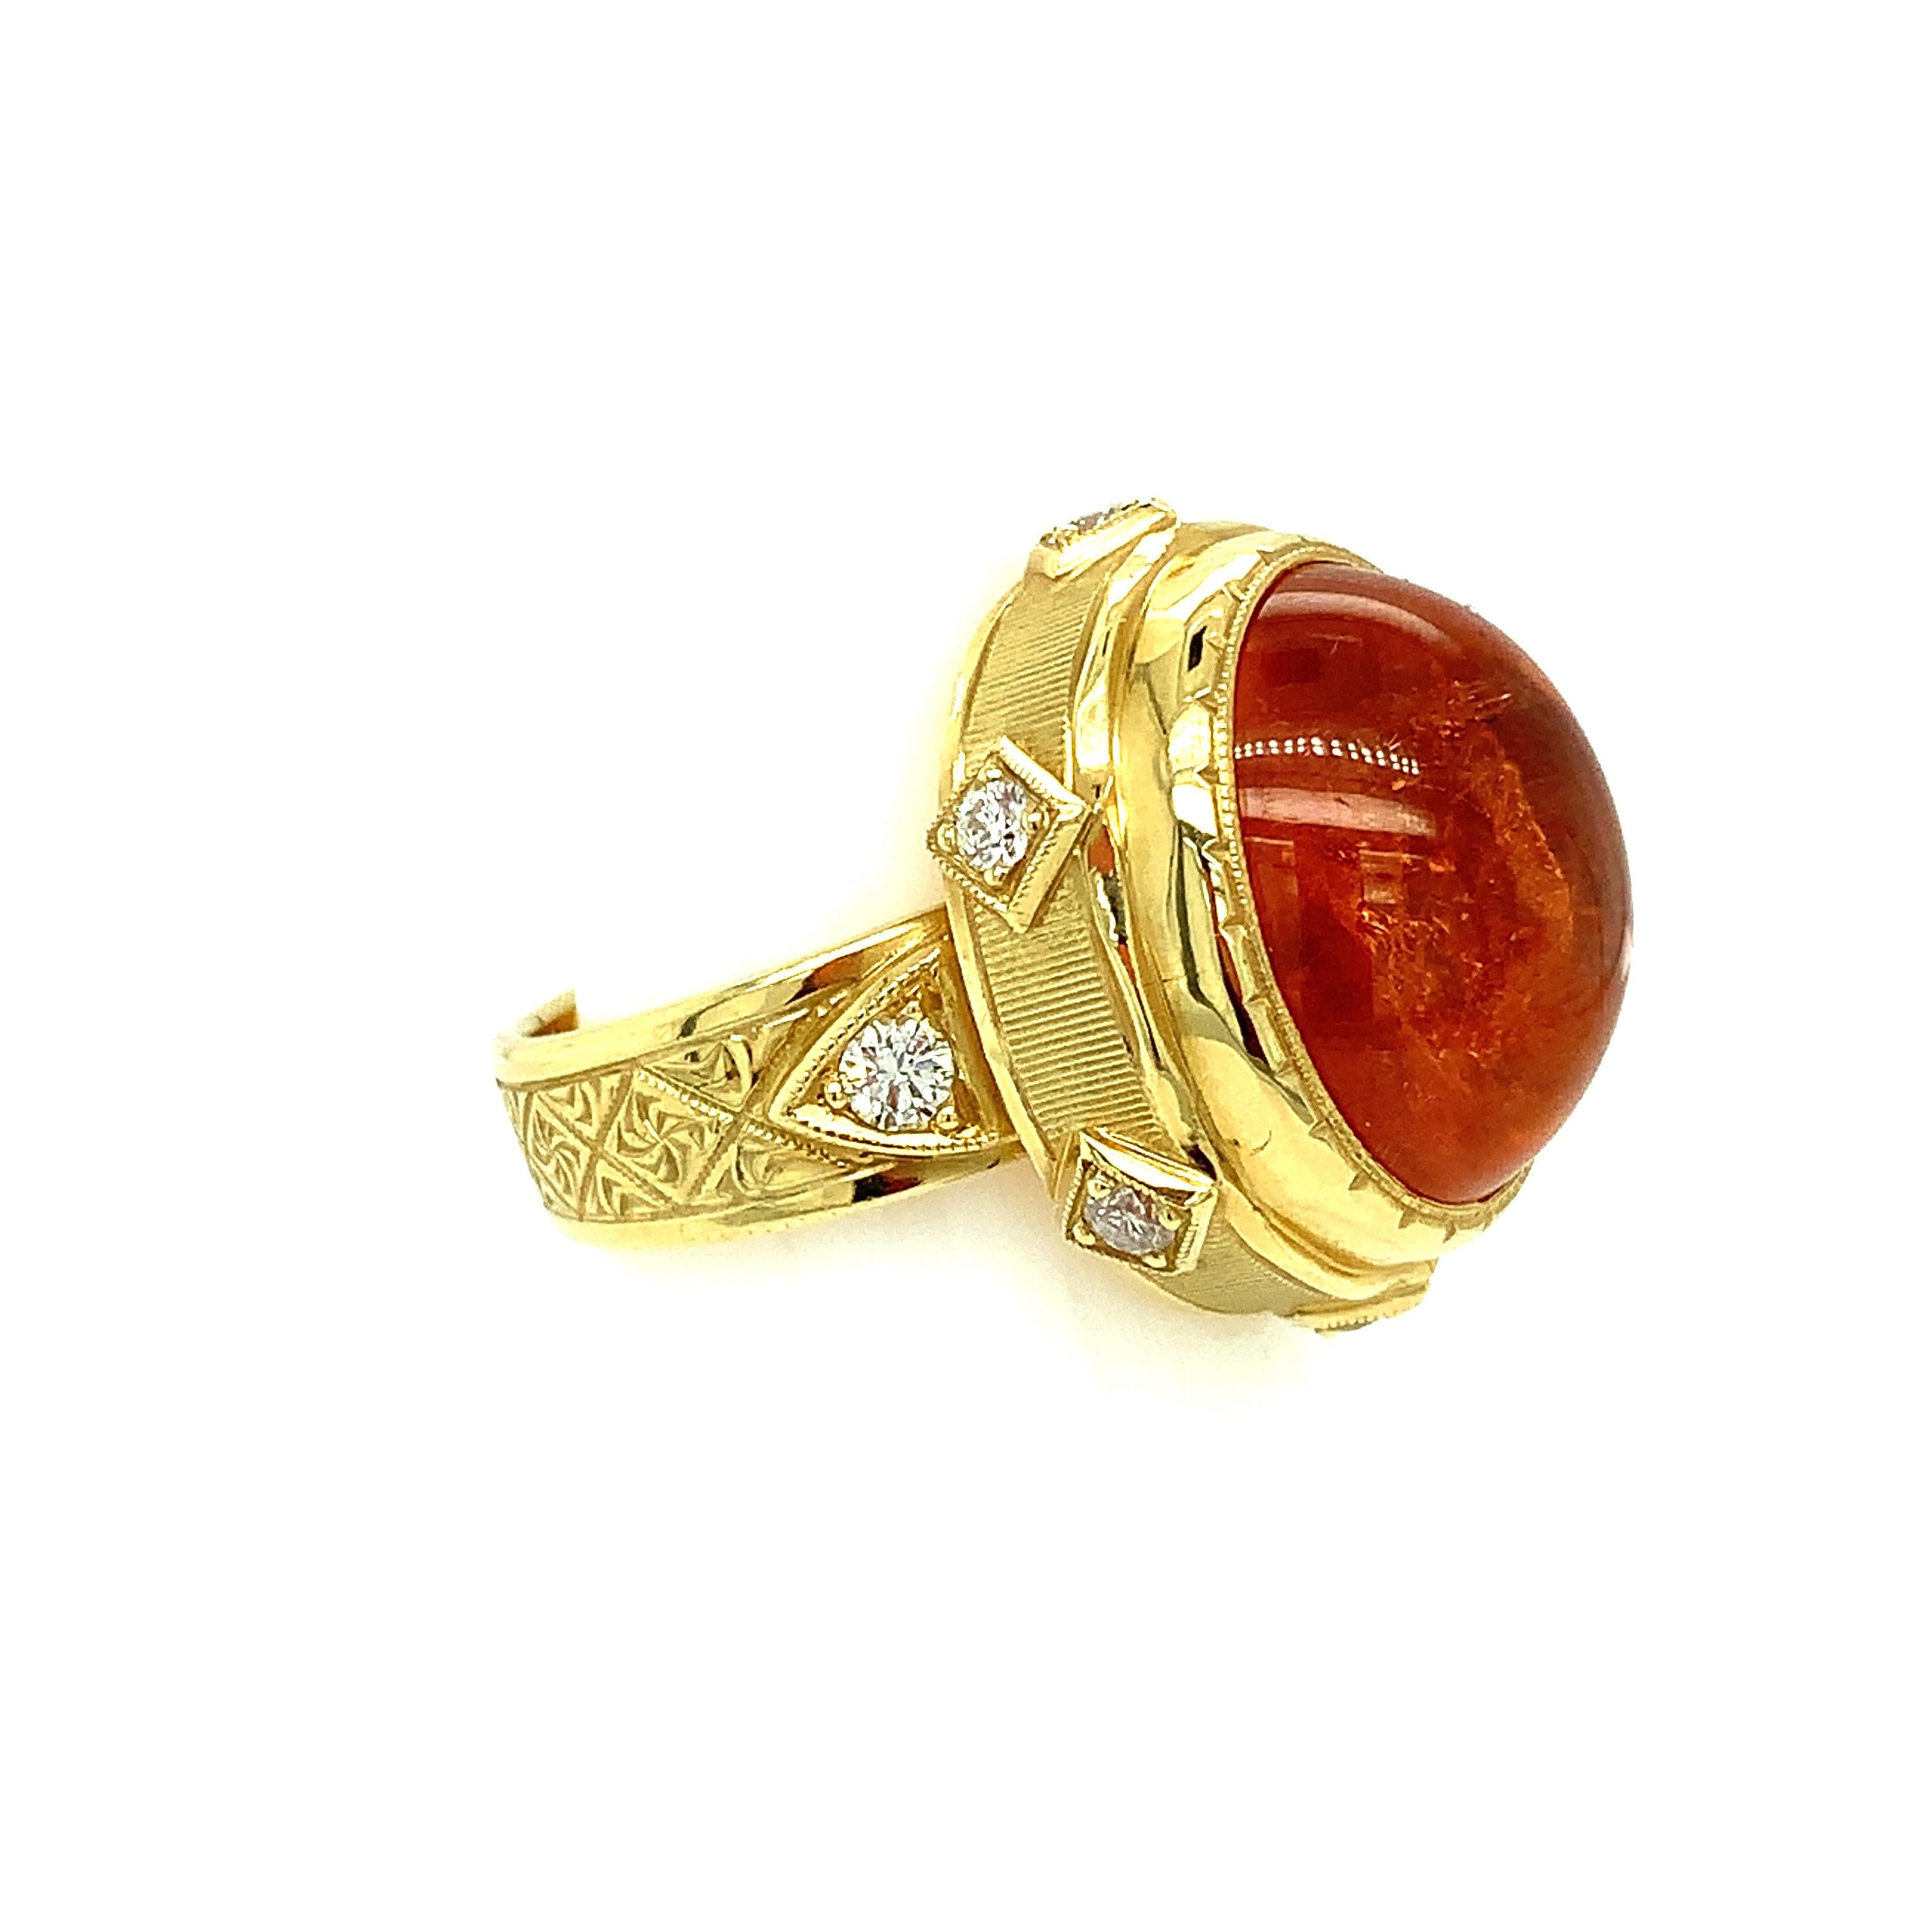 24.39 Carat Spessartite Garnet Cabochon and Diamond, 18k Yellow Gold Ring In New Condition For Sale In Los Angeles, CA